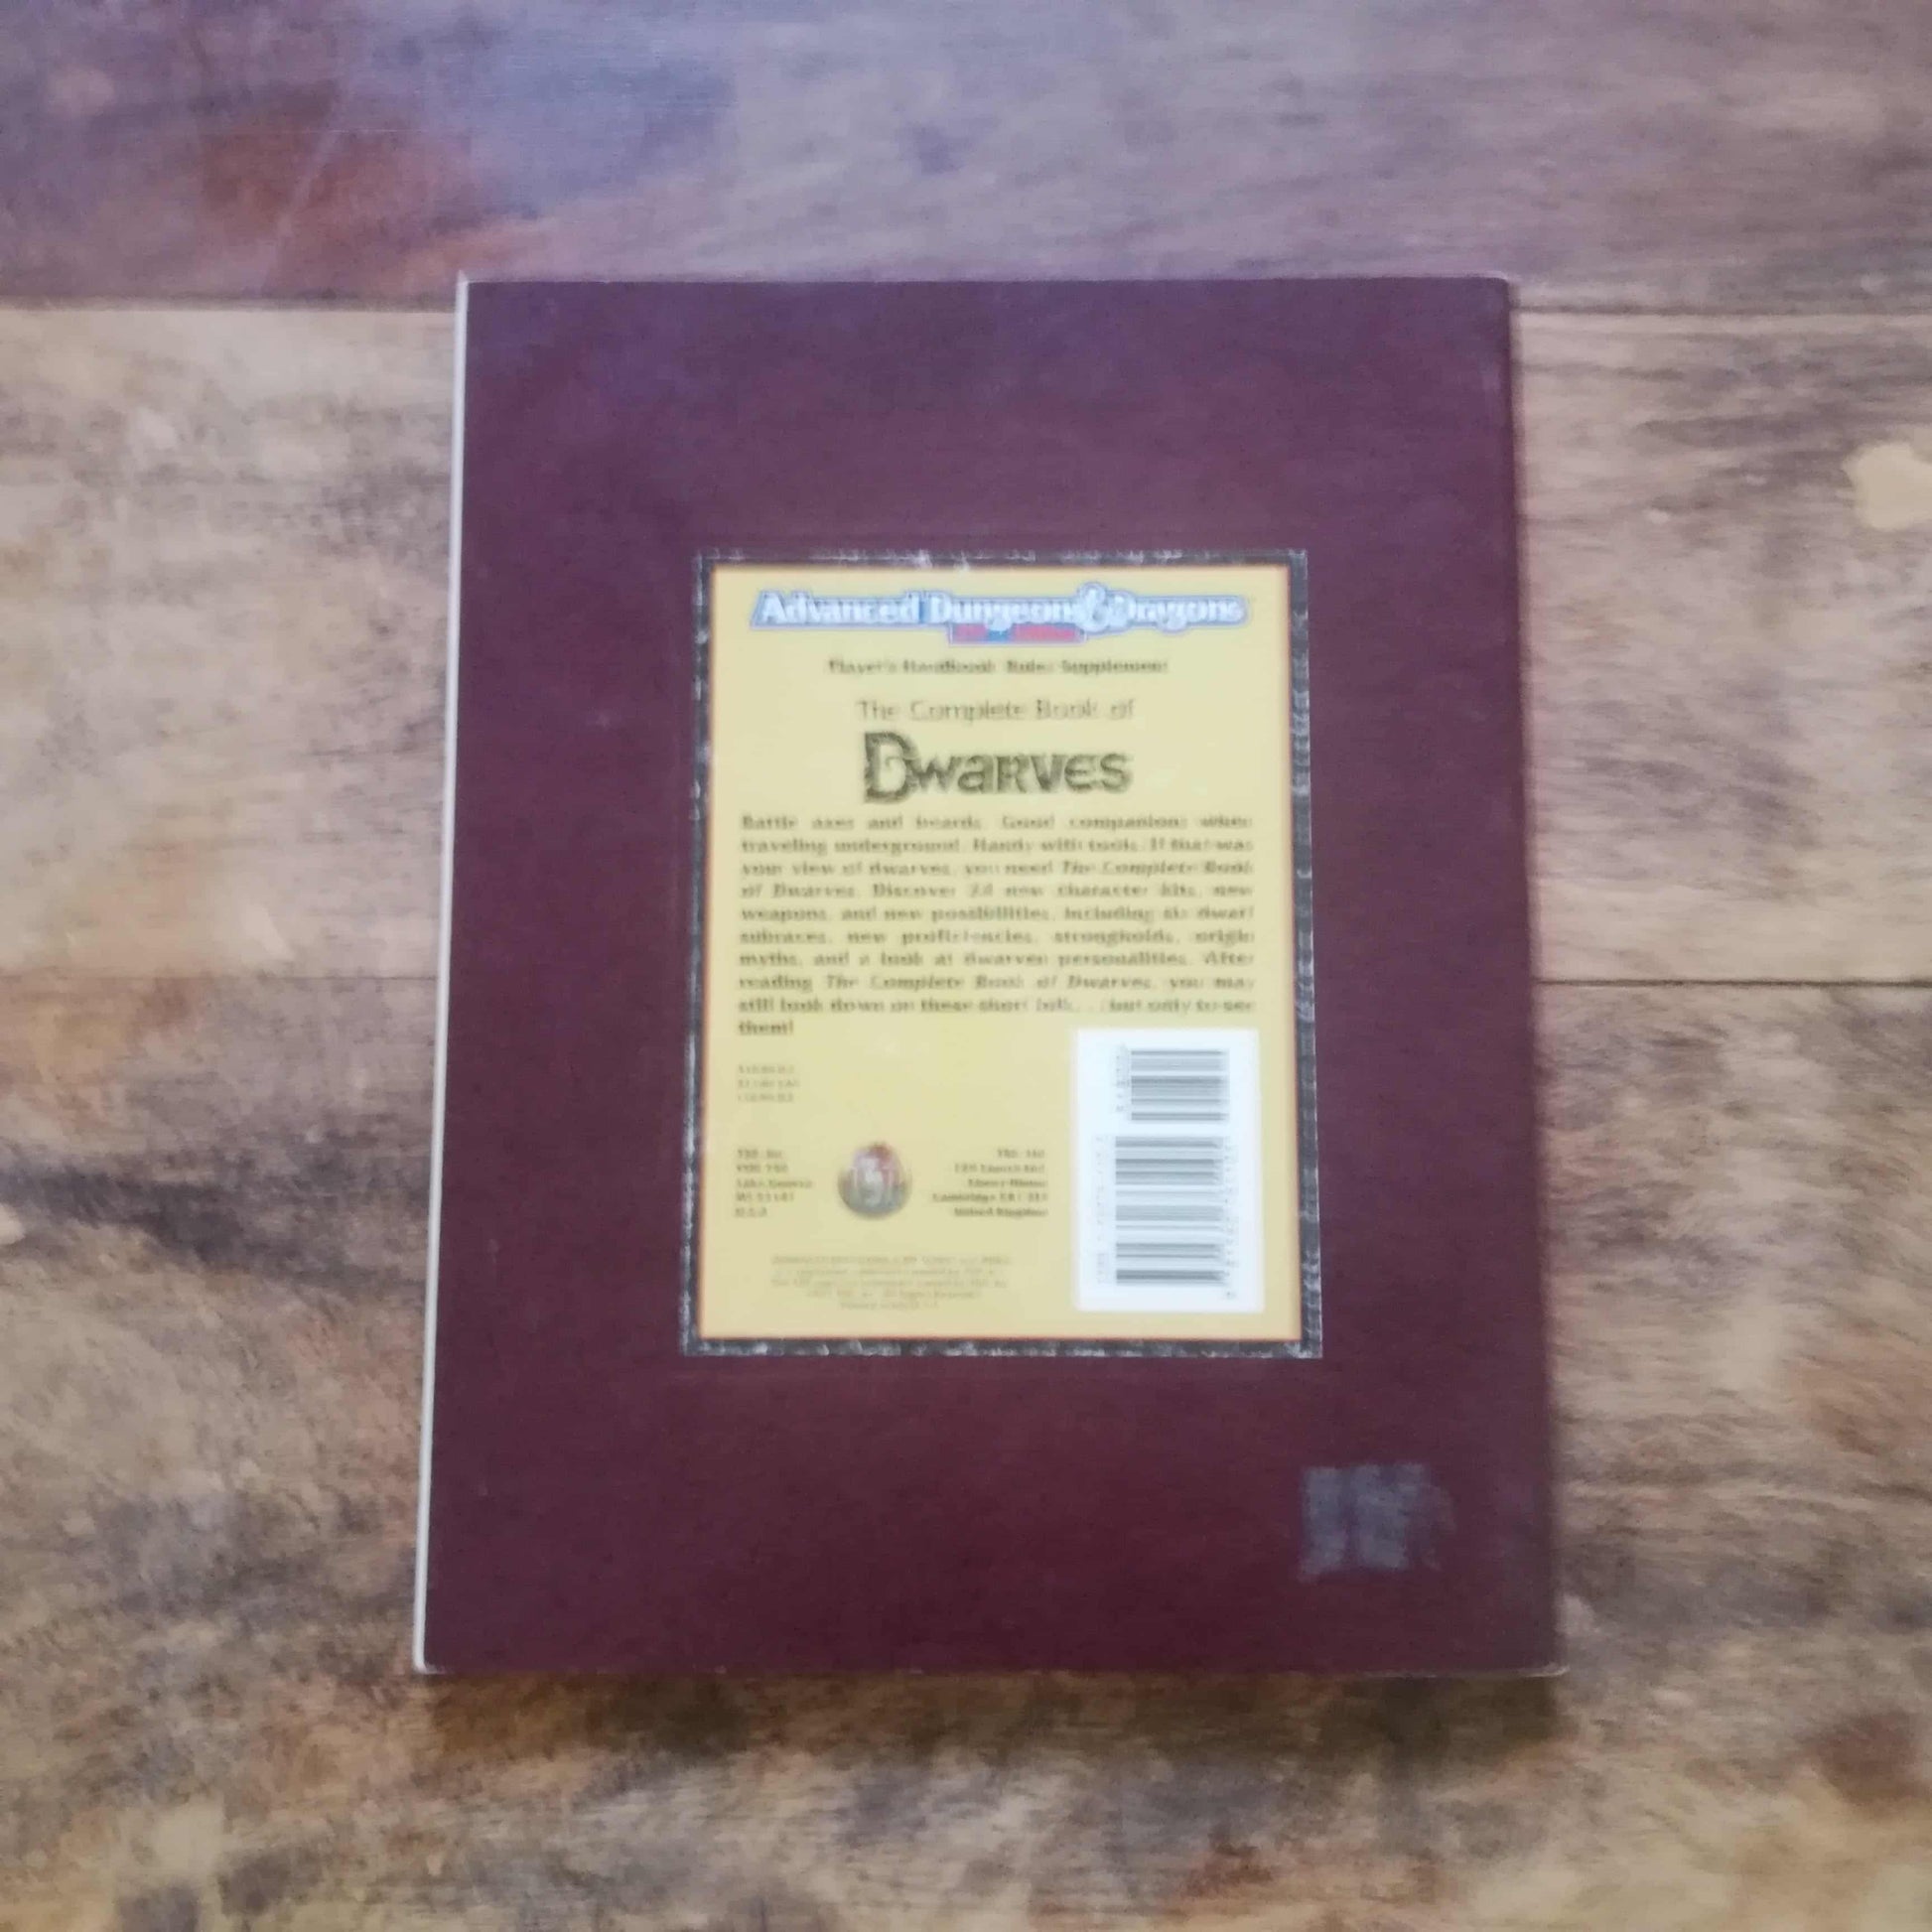 AD&D The Complete Book of Dwarves - AllRoleplaying.com